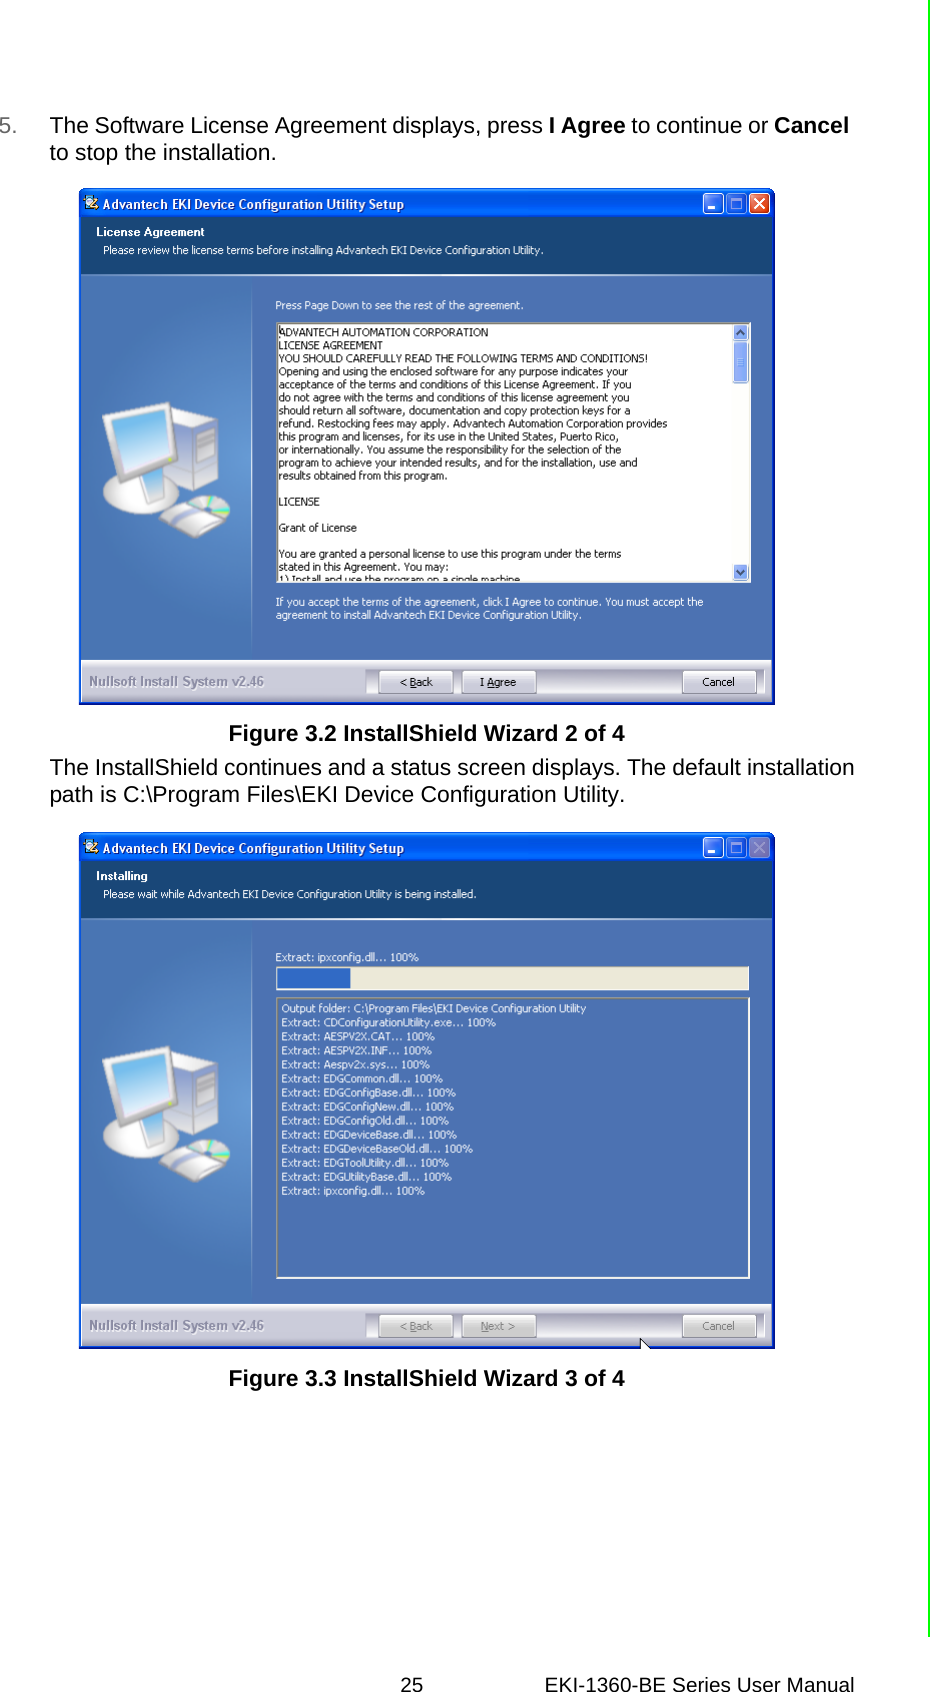 25 EKI-1360-BE Series User Manual 5. The Software License Agreement displays, press I Agree to continue or Cancel to stop the installation.Figure 3.2 InstallShield Wizard 2 of 4The InstallShield continues and a status screen displays. The default installationpath is C:\Program Files\EKI Device Configuration Utility.Figure 3.3 InstallShield Wizard 3 of 4